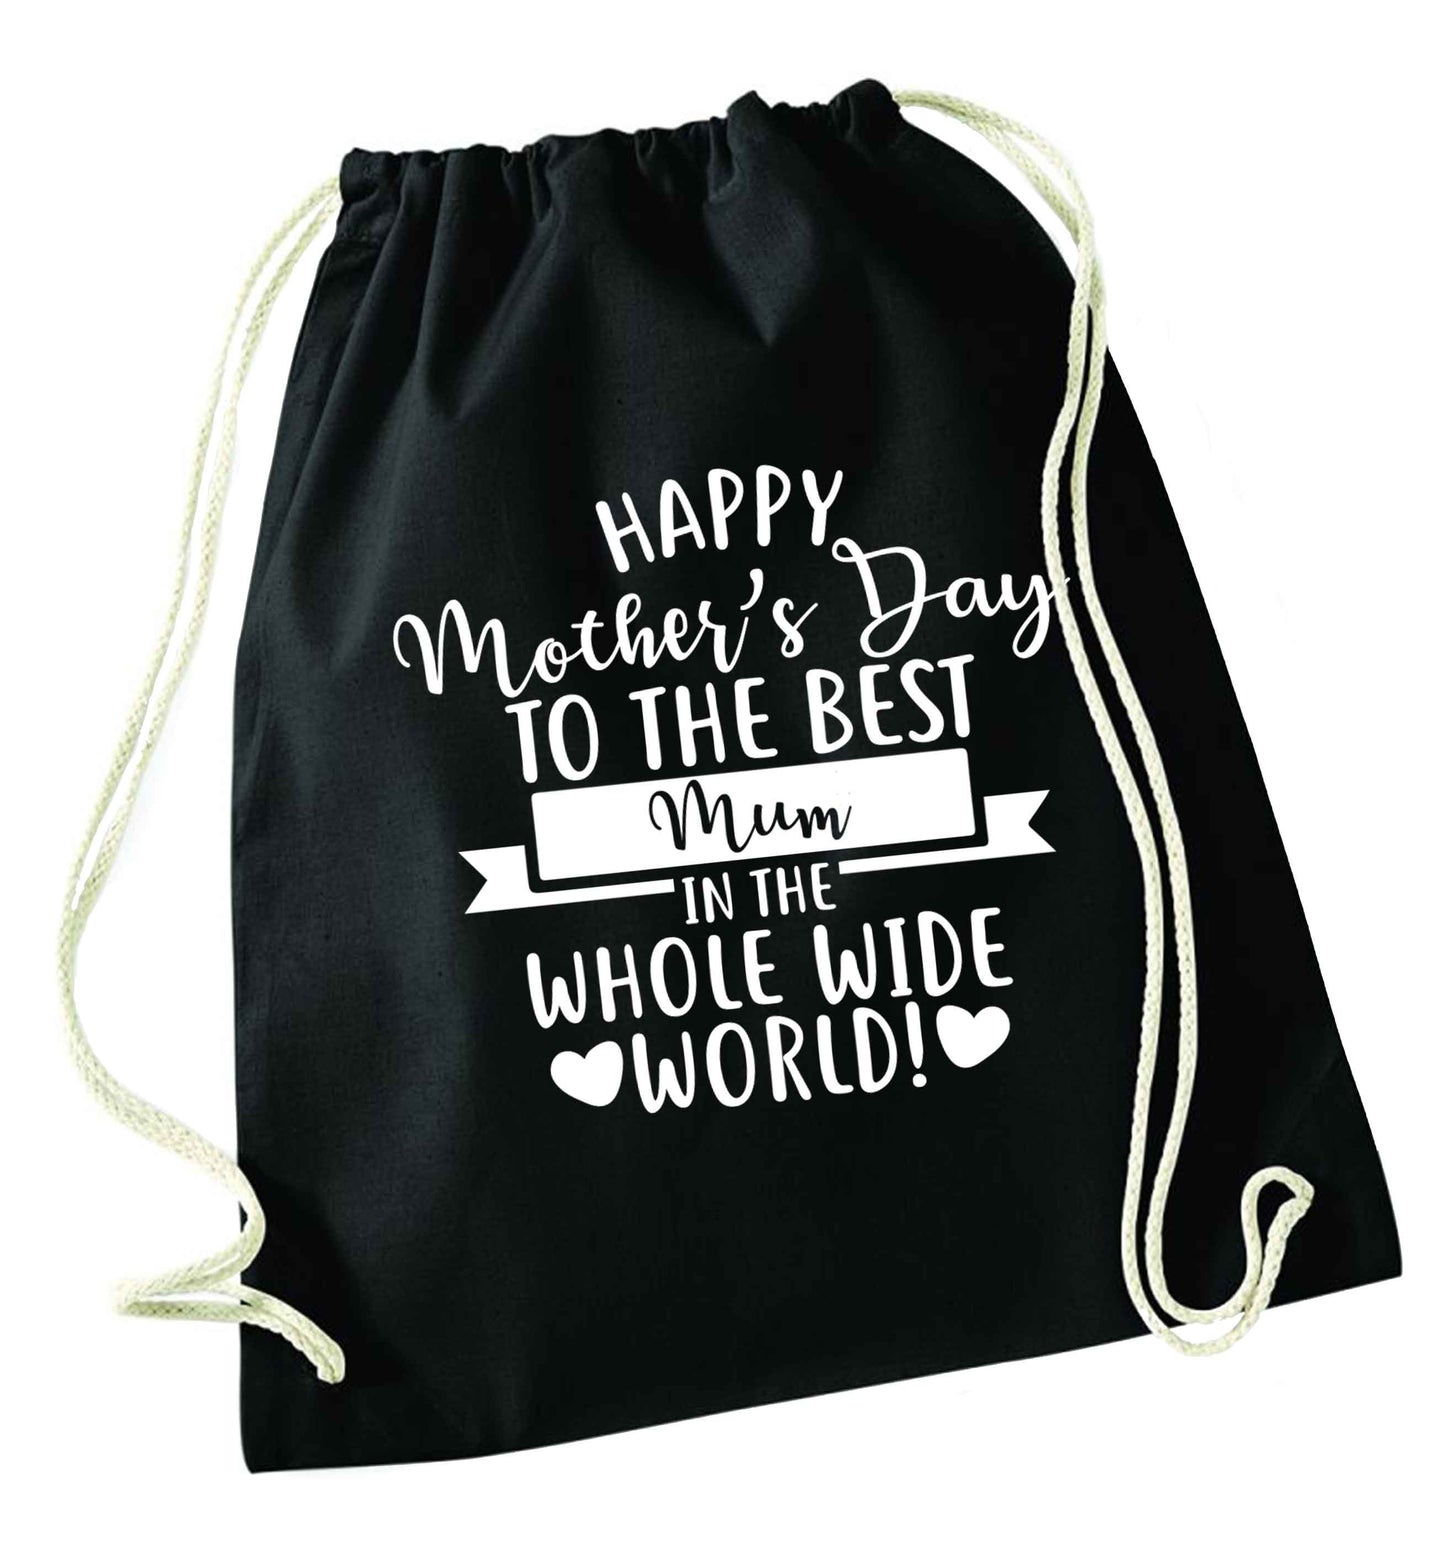 Happy mother's day to the best mum in the world black drawstring bag